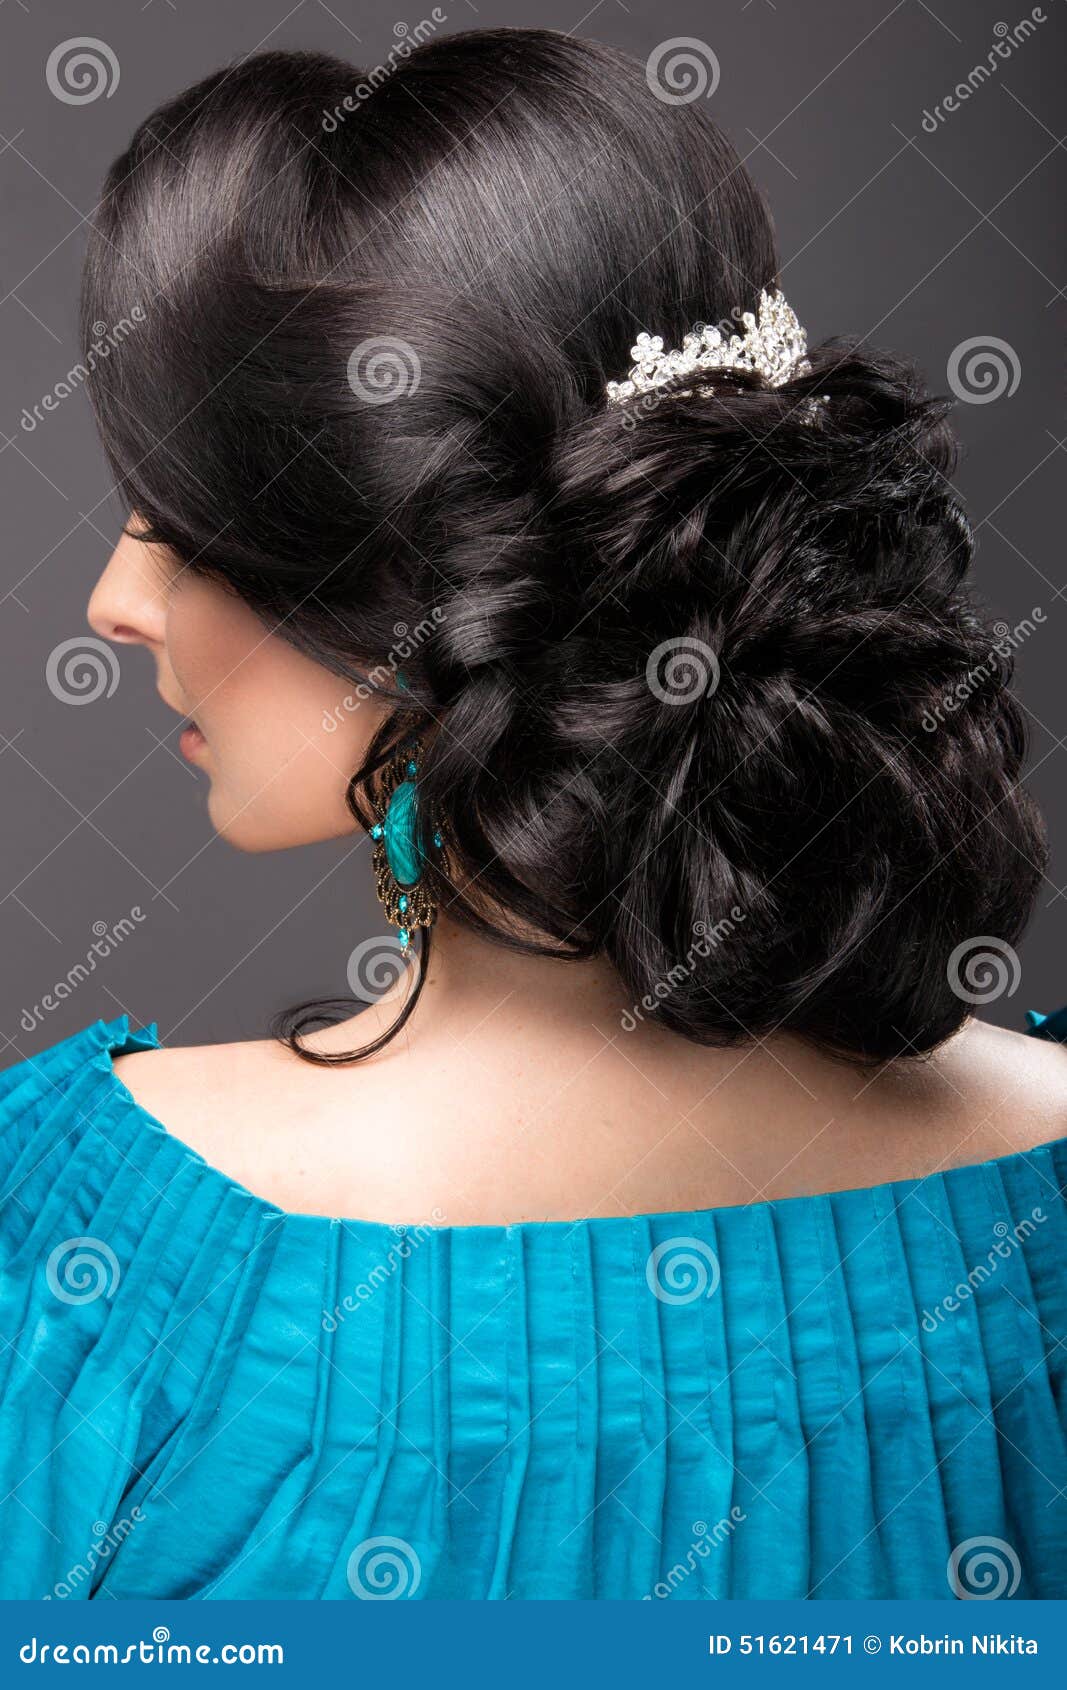 How to Choose the Best Hairstyle for Your Dress Type - Zola Expert Wedding  Advice